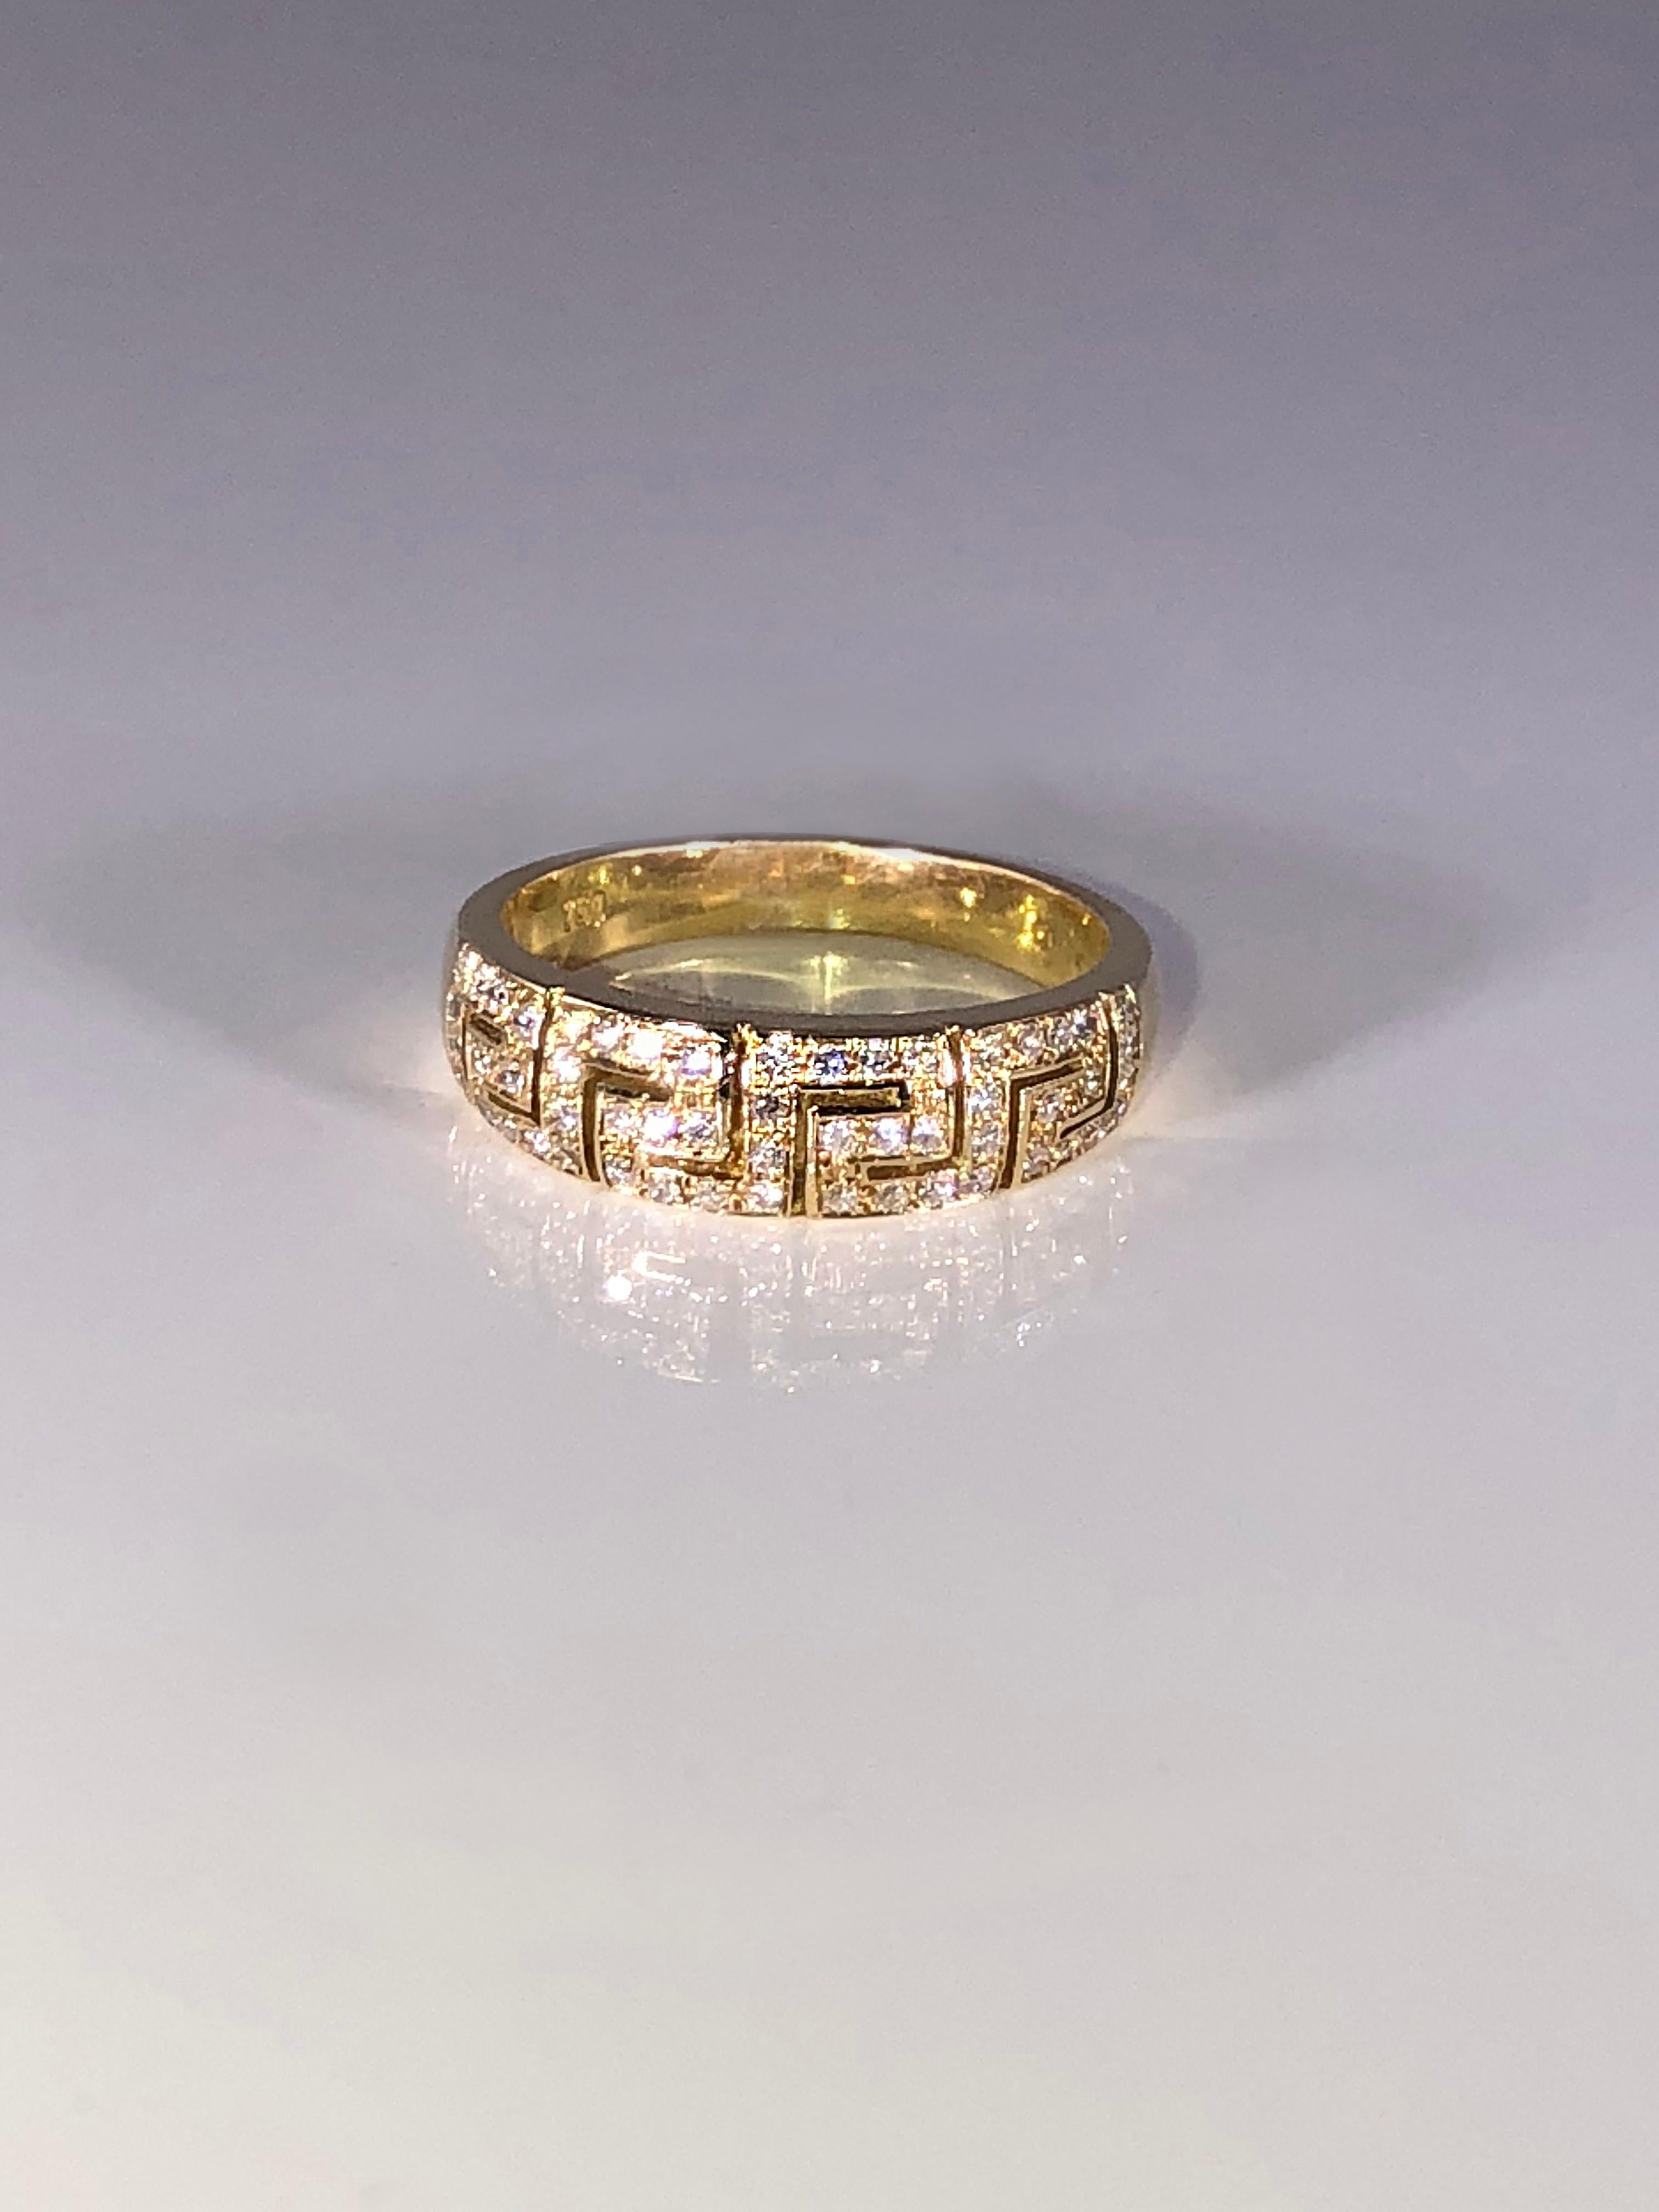 S. Georgios design 18 Karat Yellow Gold Hand Made Diamond Ring with the Greek Key design that symbolizes eternity all custom-made. It is known as the symbol of long life. 
The stunning ring is decorated with White Brilliant cut Diamonds total weight